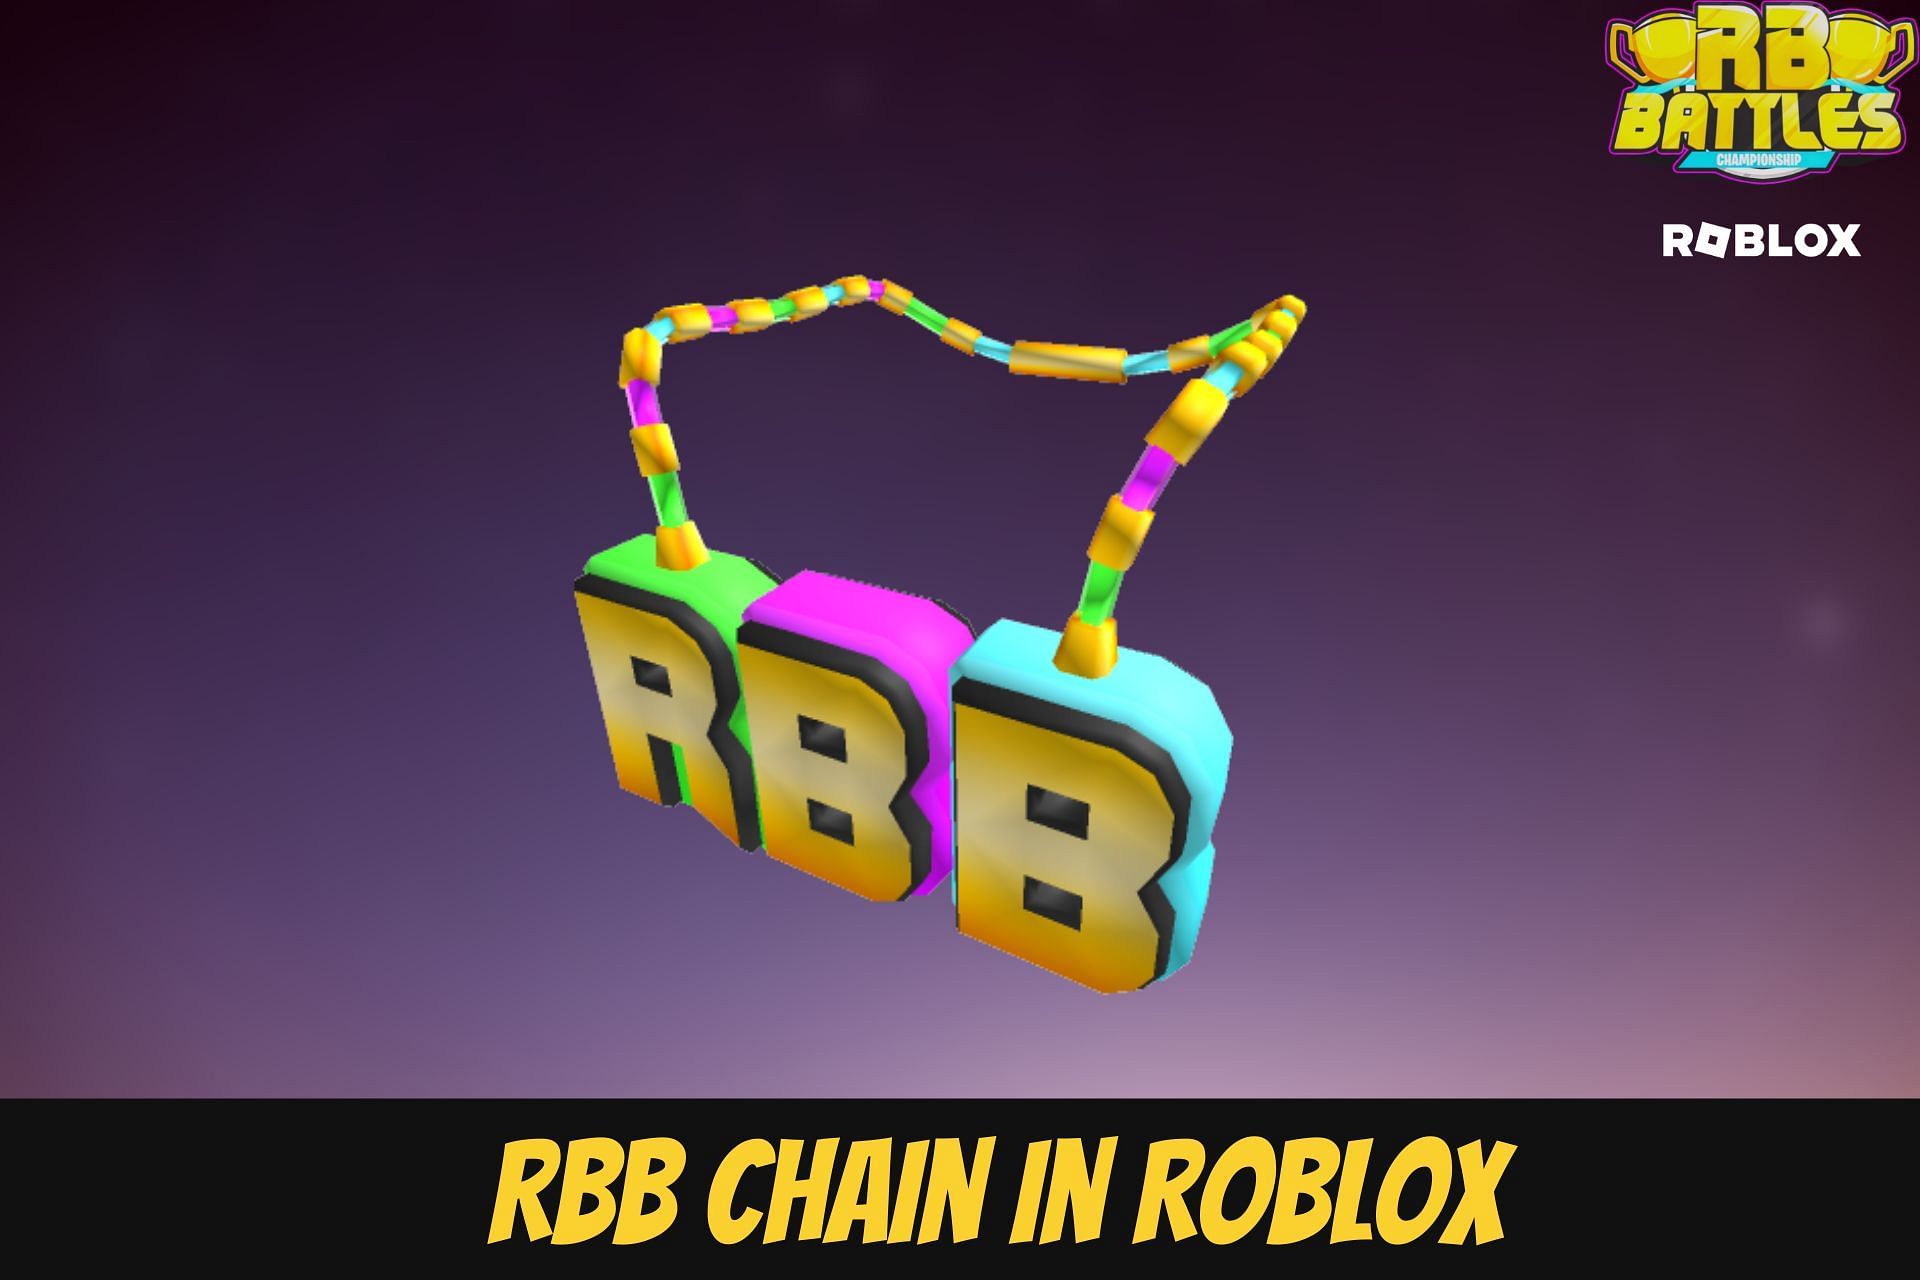 RBB Chain for free in Roblox